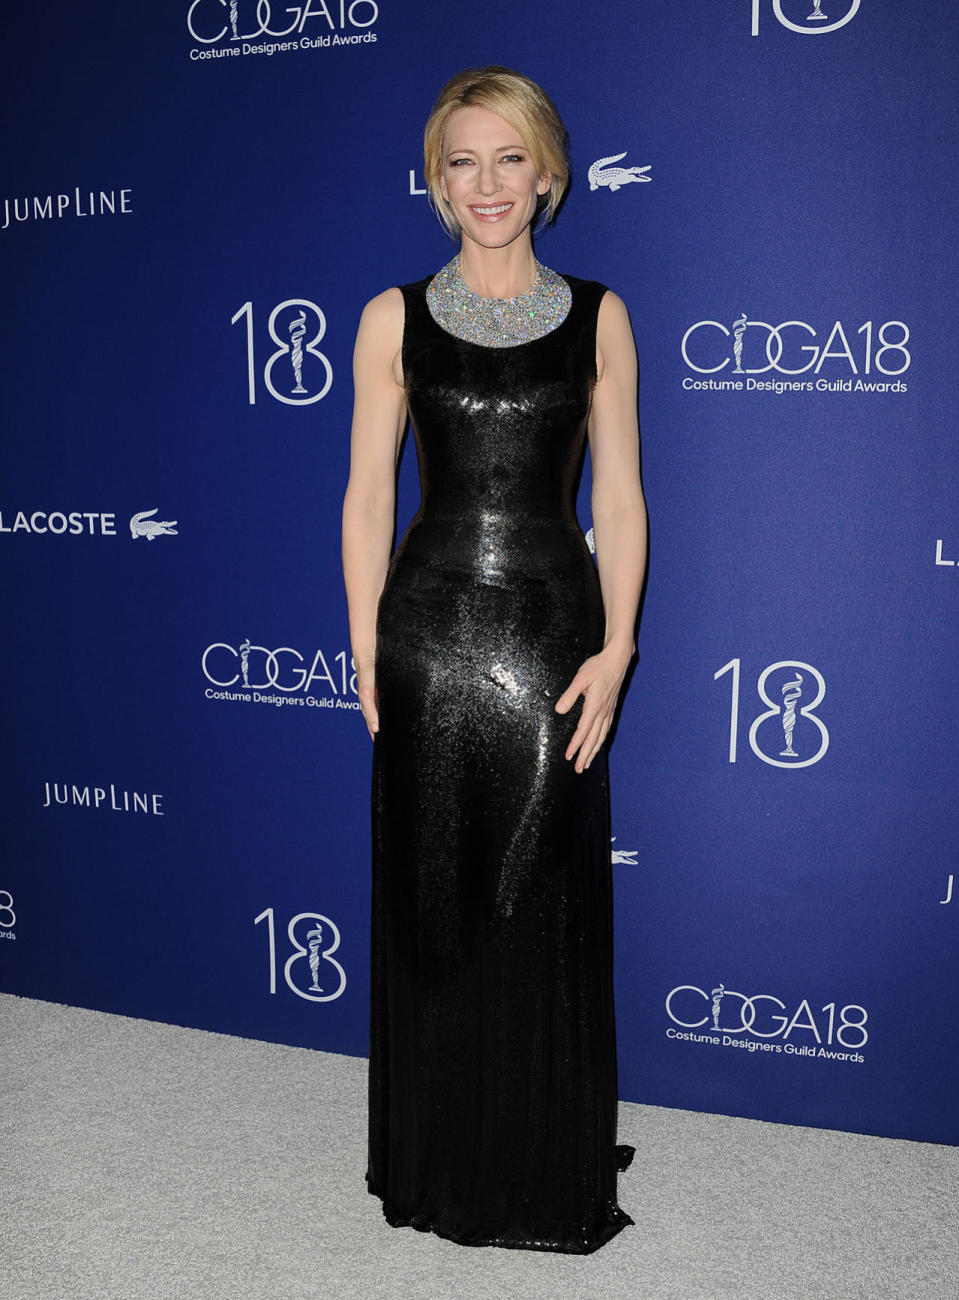 Cate Blanchett in Atelier Versace at the 18th Costume Designers Guild Awards at the Beverly Hilton on Feb. 23, 2016, in Beverly Hills, Calif.